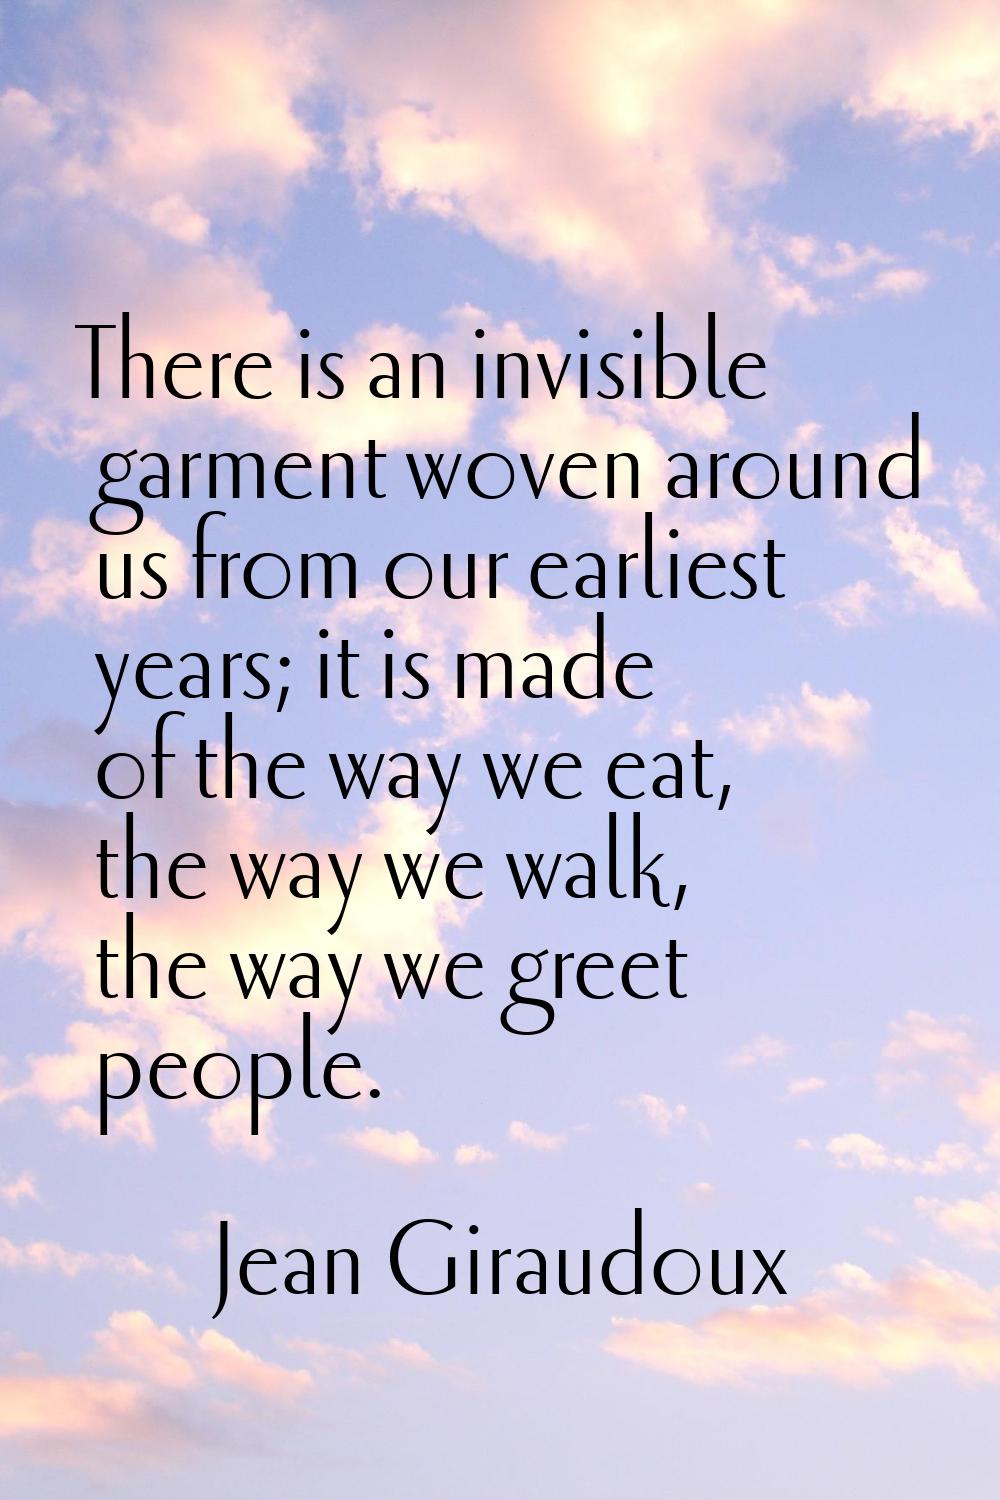 There is an invisible garment woven around us from our earliest years; it is made of the way we eat